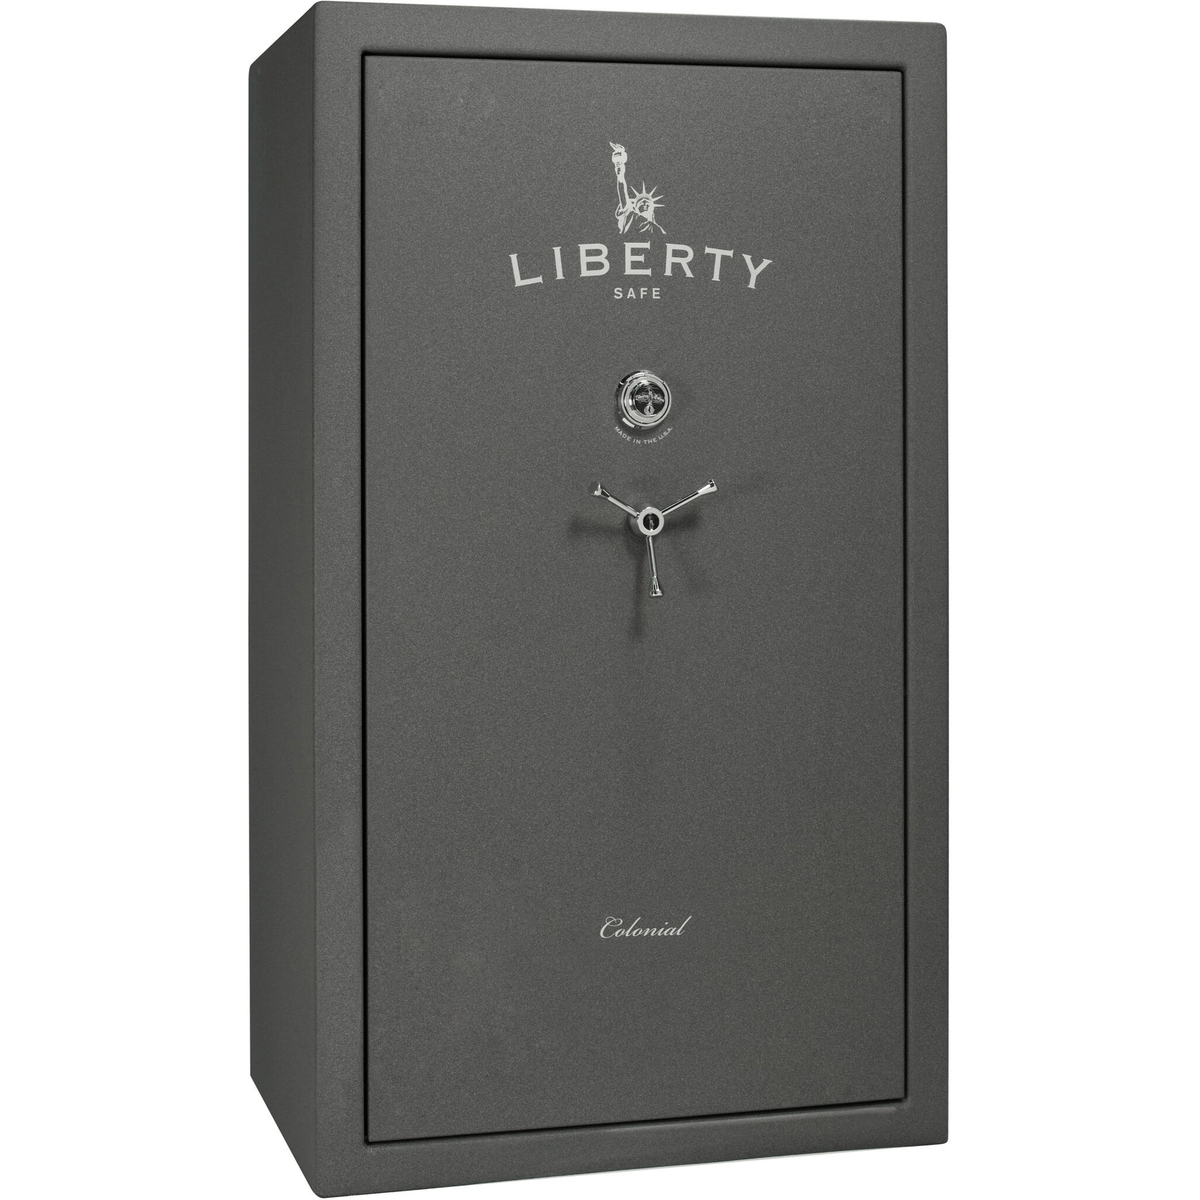 Liberty Colonial 50 Safe in Textured Granite with Chrome Mechanical Lock.